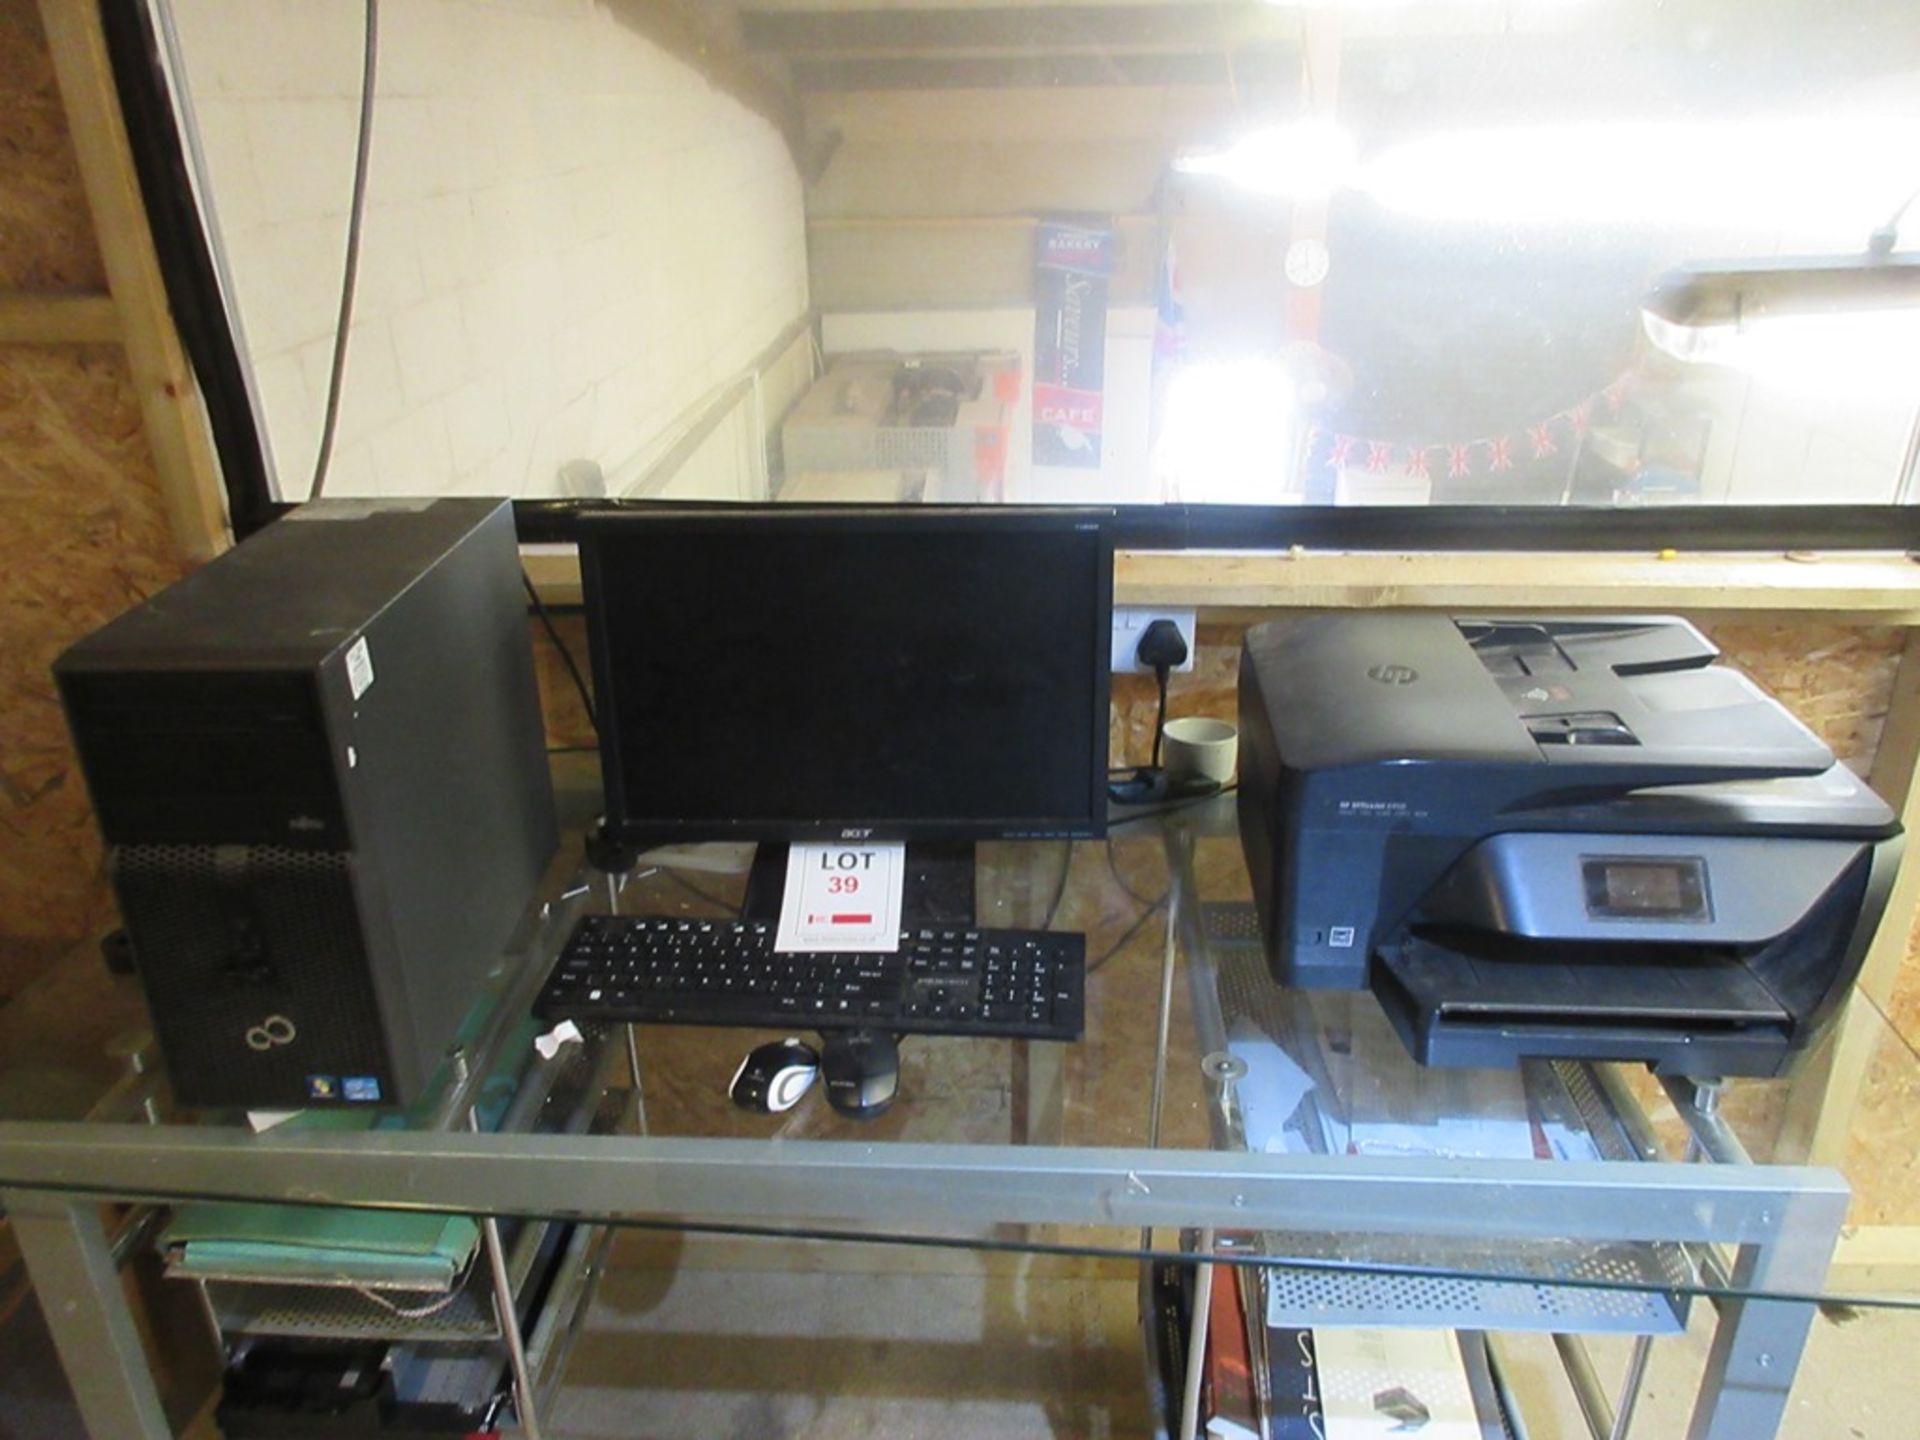 Fujitsu Corei3 computer system with Acer flat screen monitor, keyboard, mouse and HP Officejet